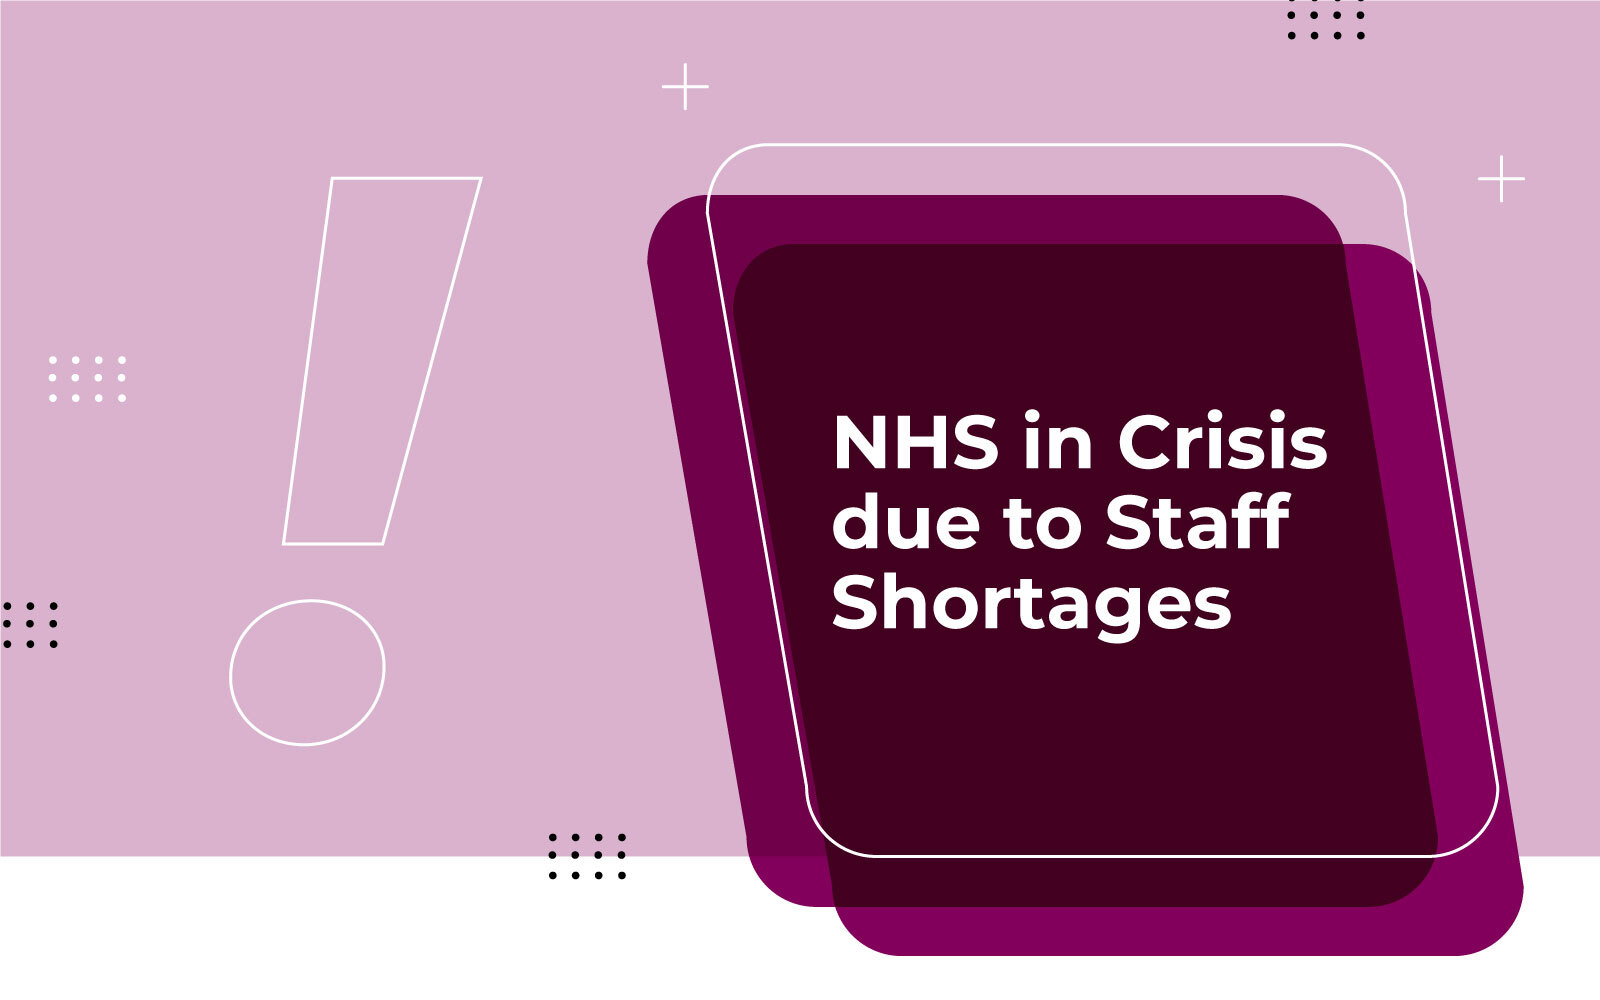 NHS in Crisis due to Staff Shortages